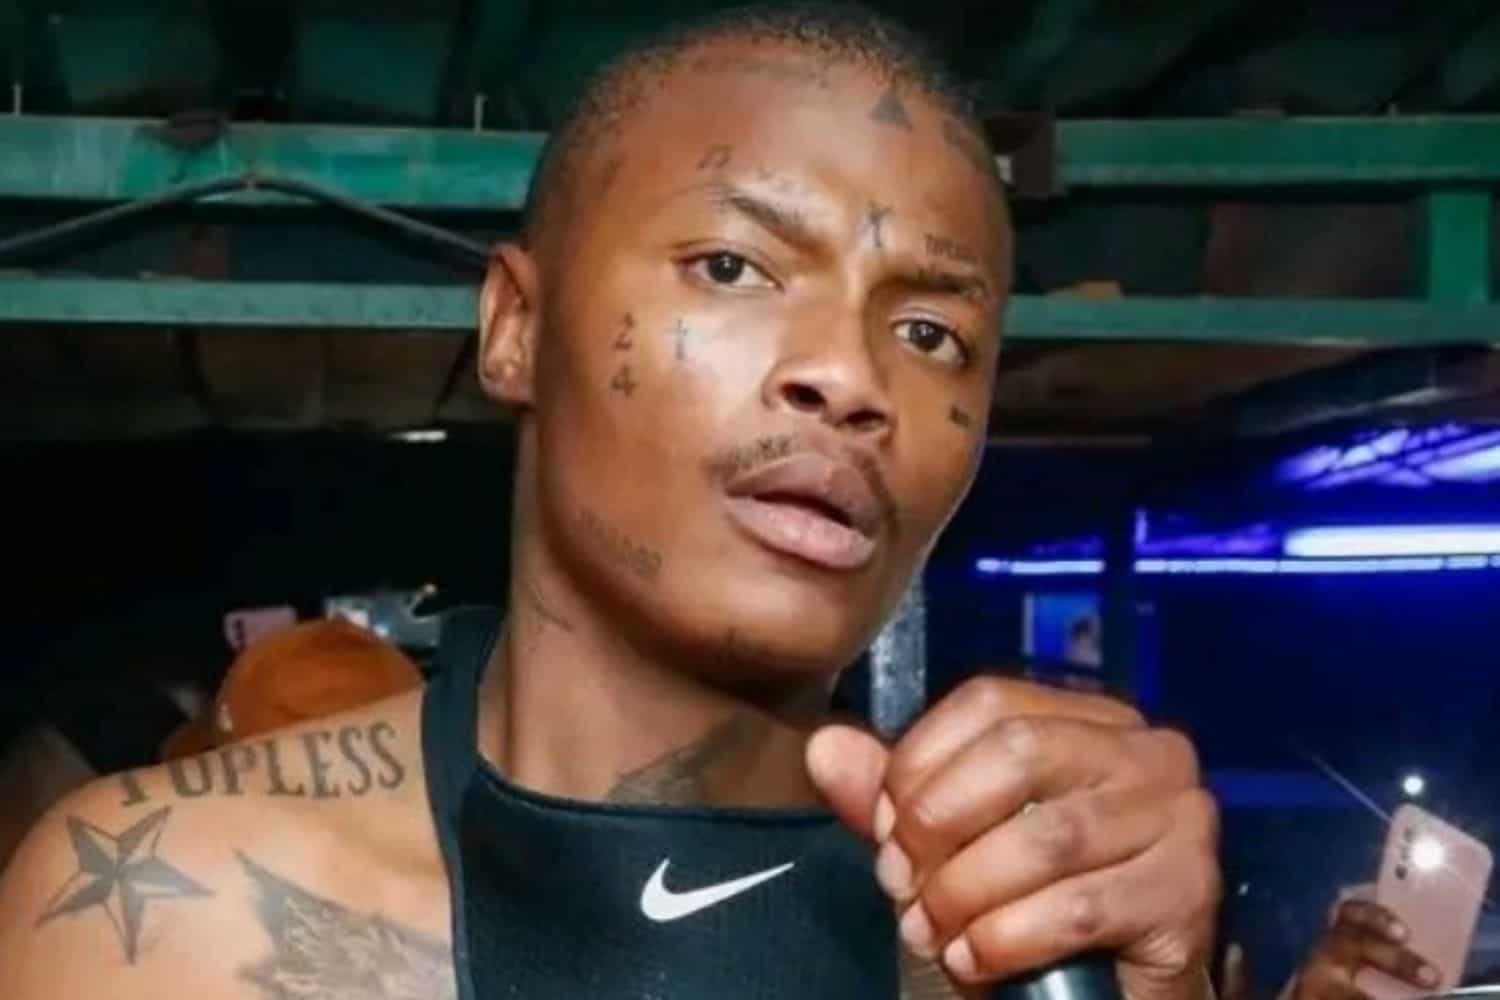 Hired Killers After Shebeshxt? Sangoma Speaks After Rapper'S Outcry